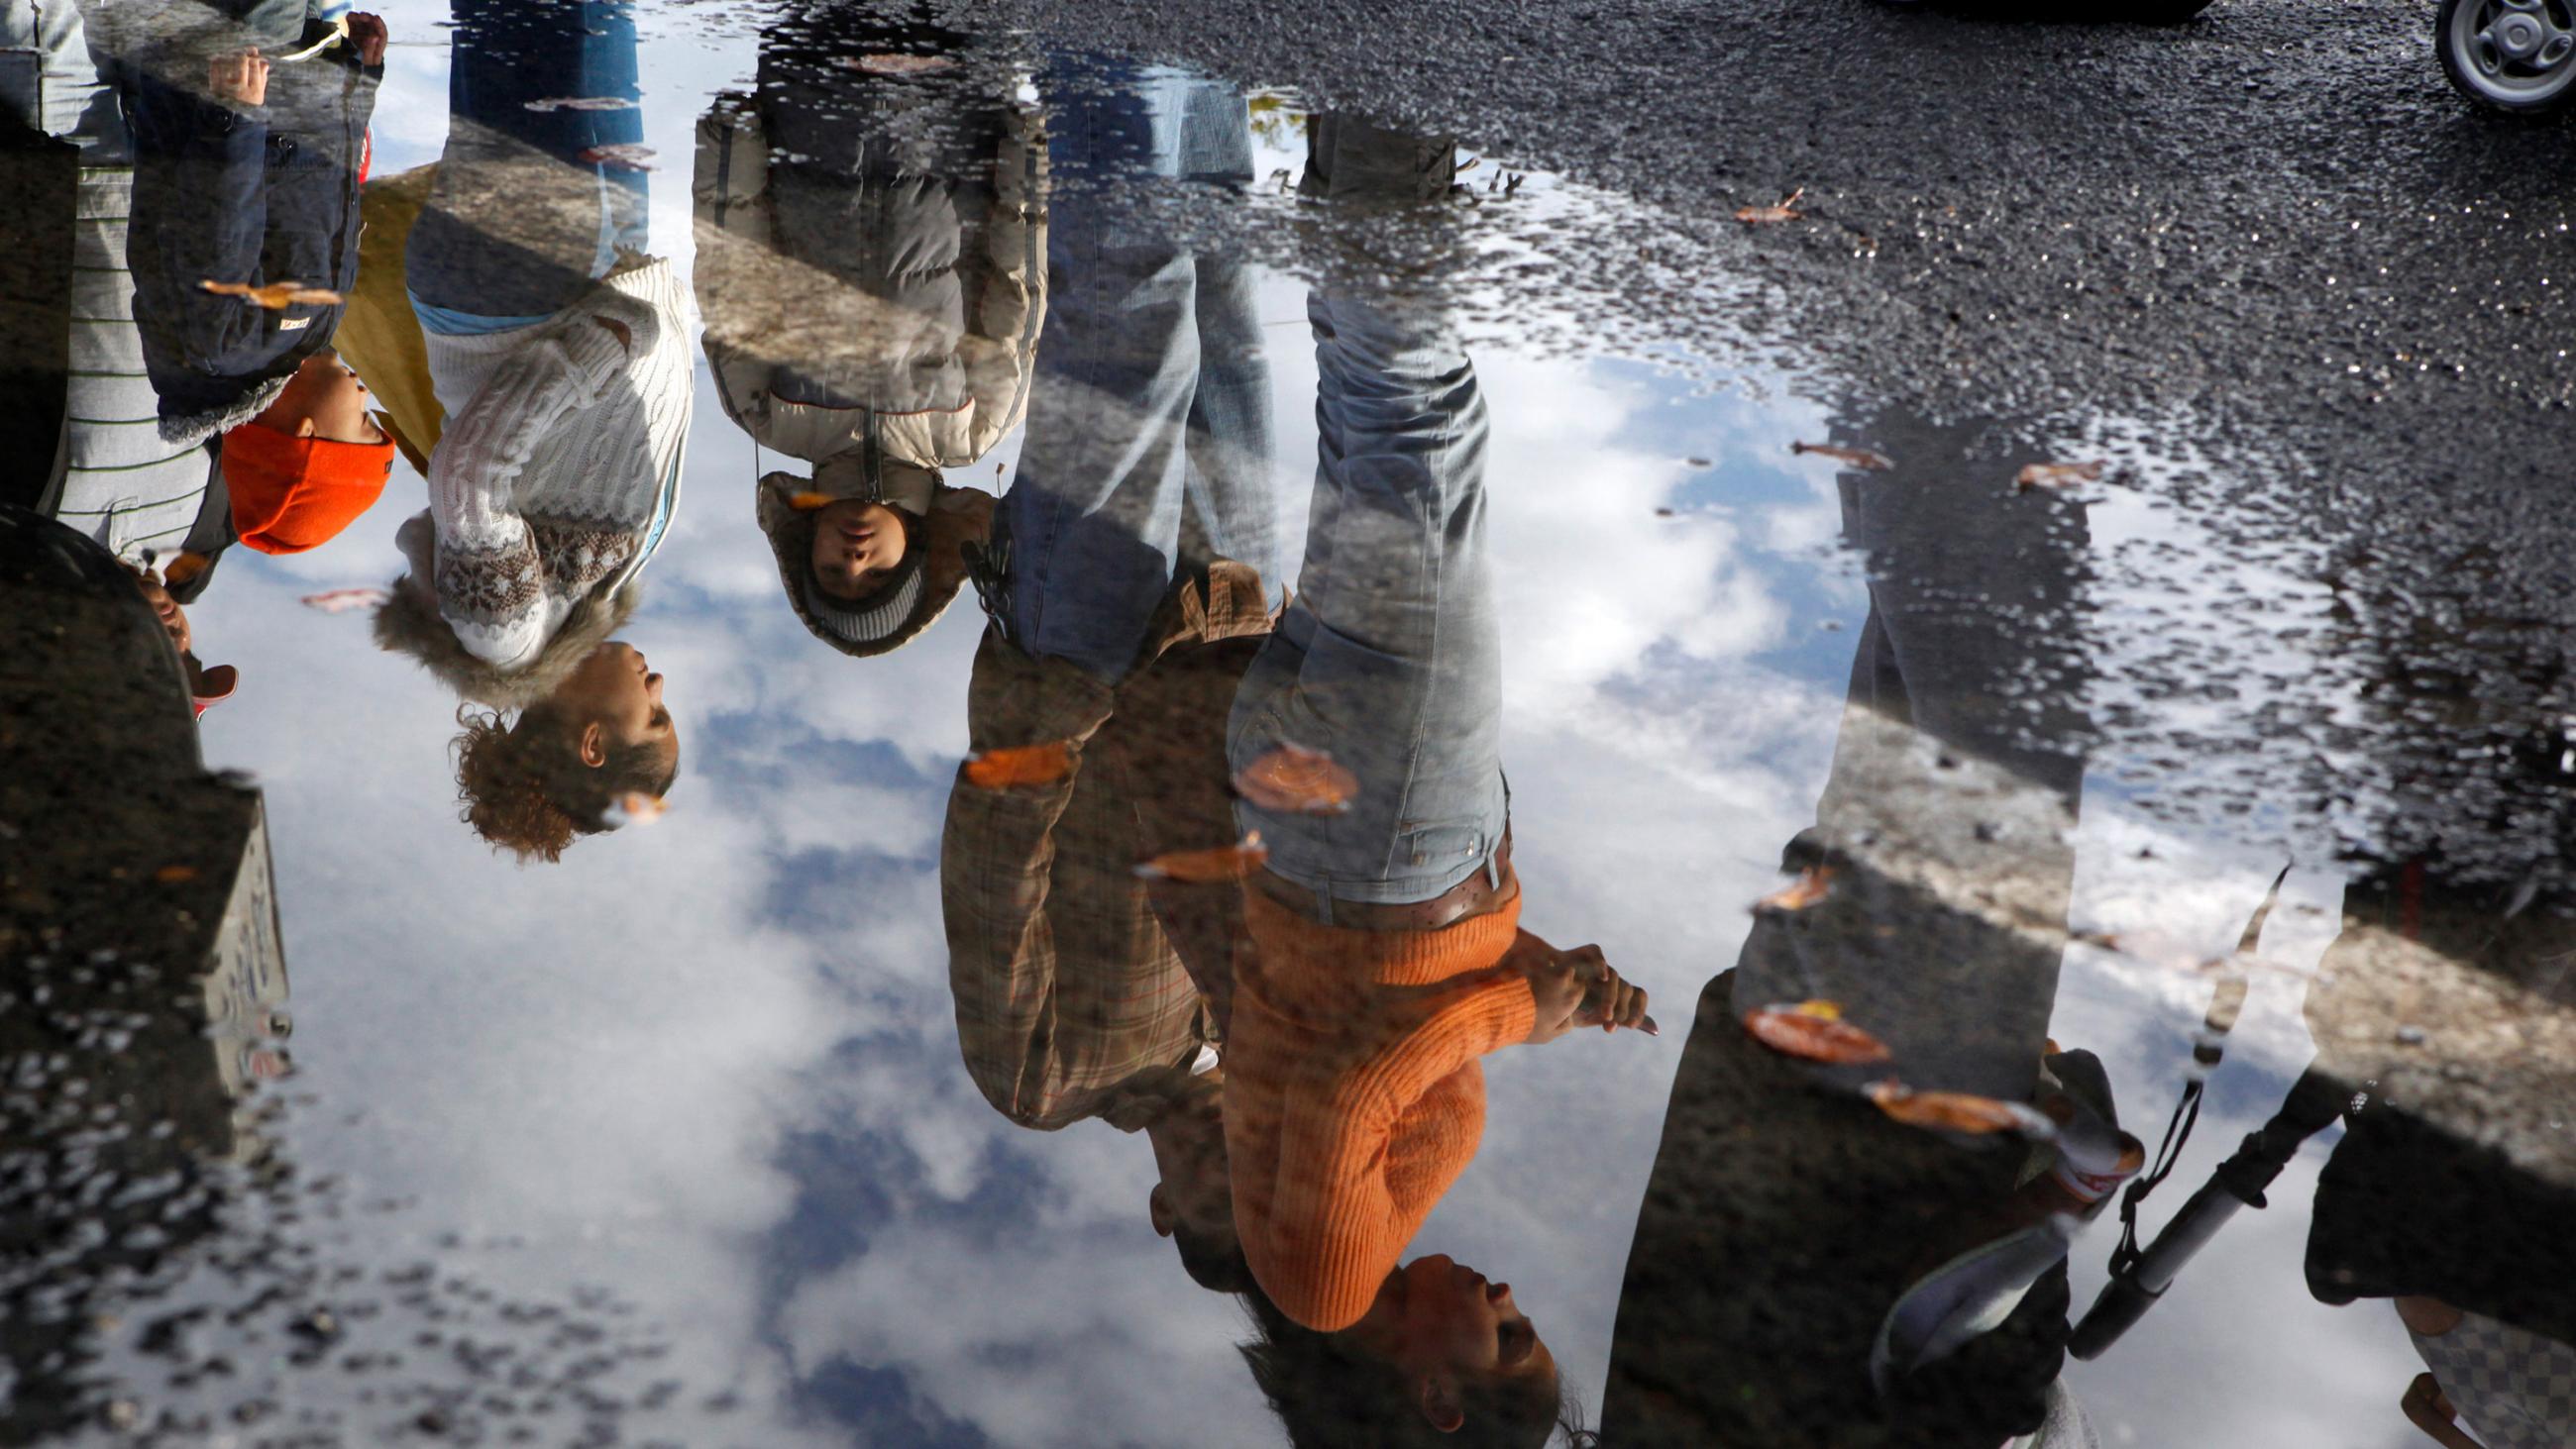 The photo shows a mud puddle with people standing in line reflected in the water. 